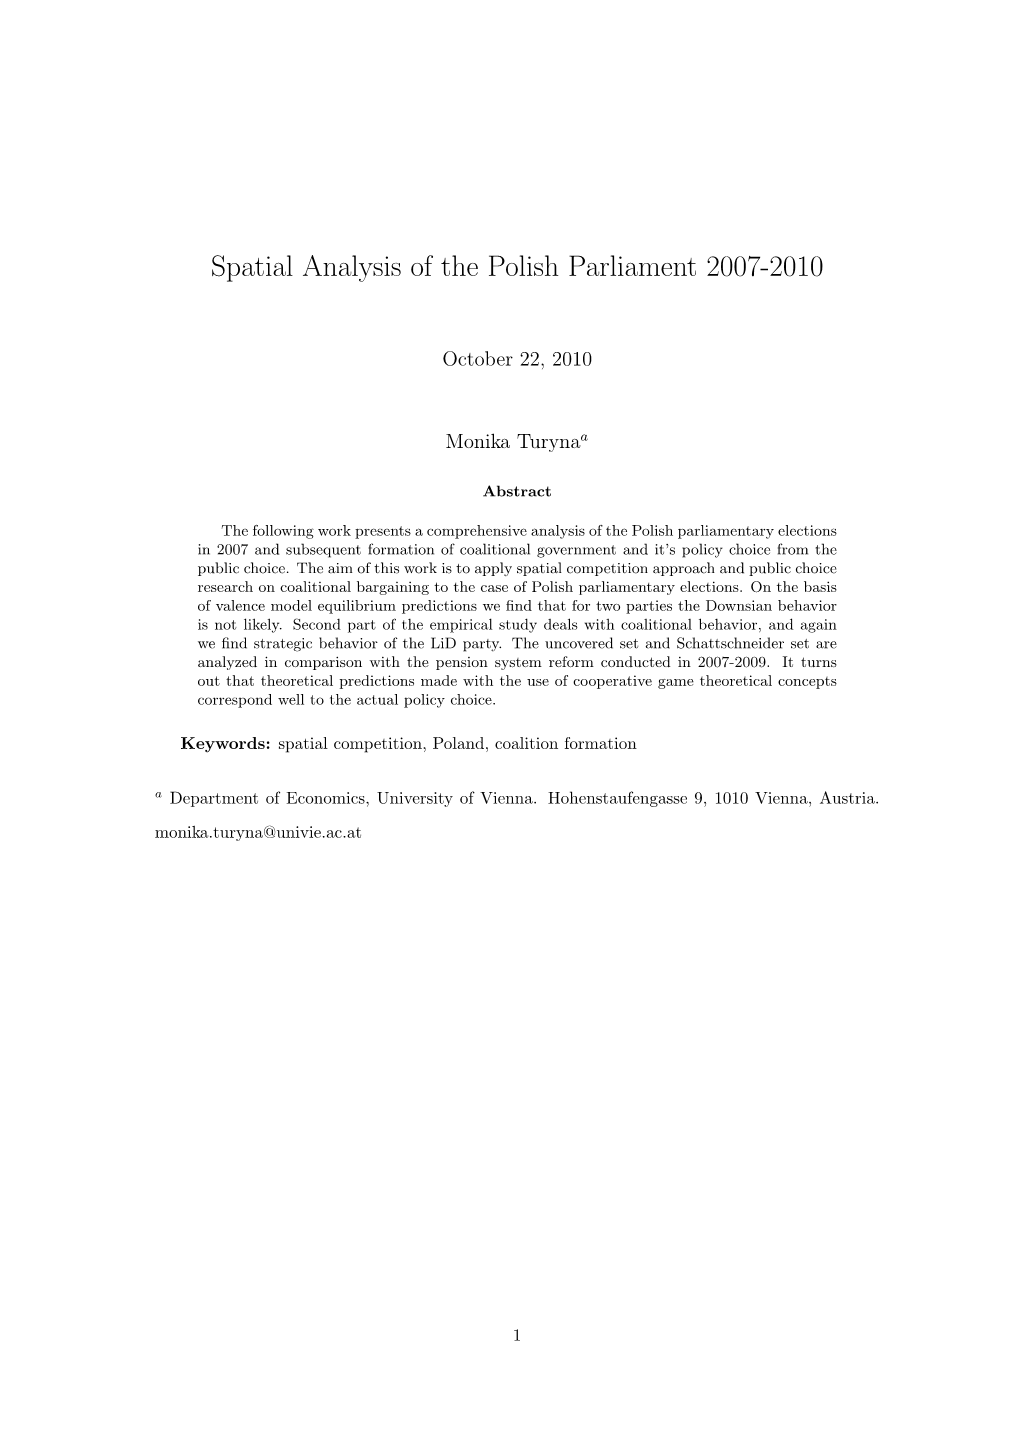 Spatial Analysis of the Polish Parliament 2007-2010